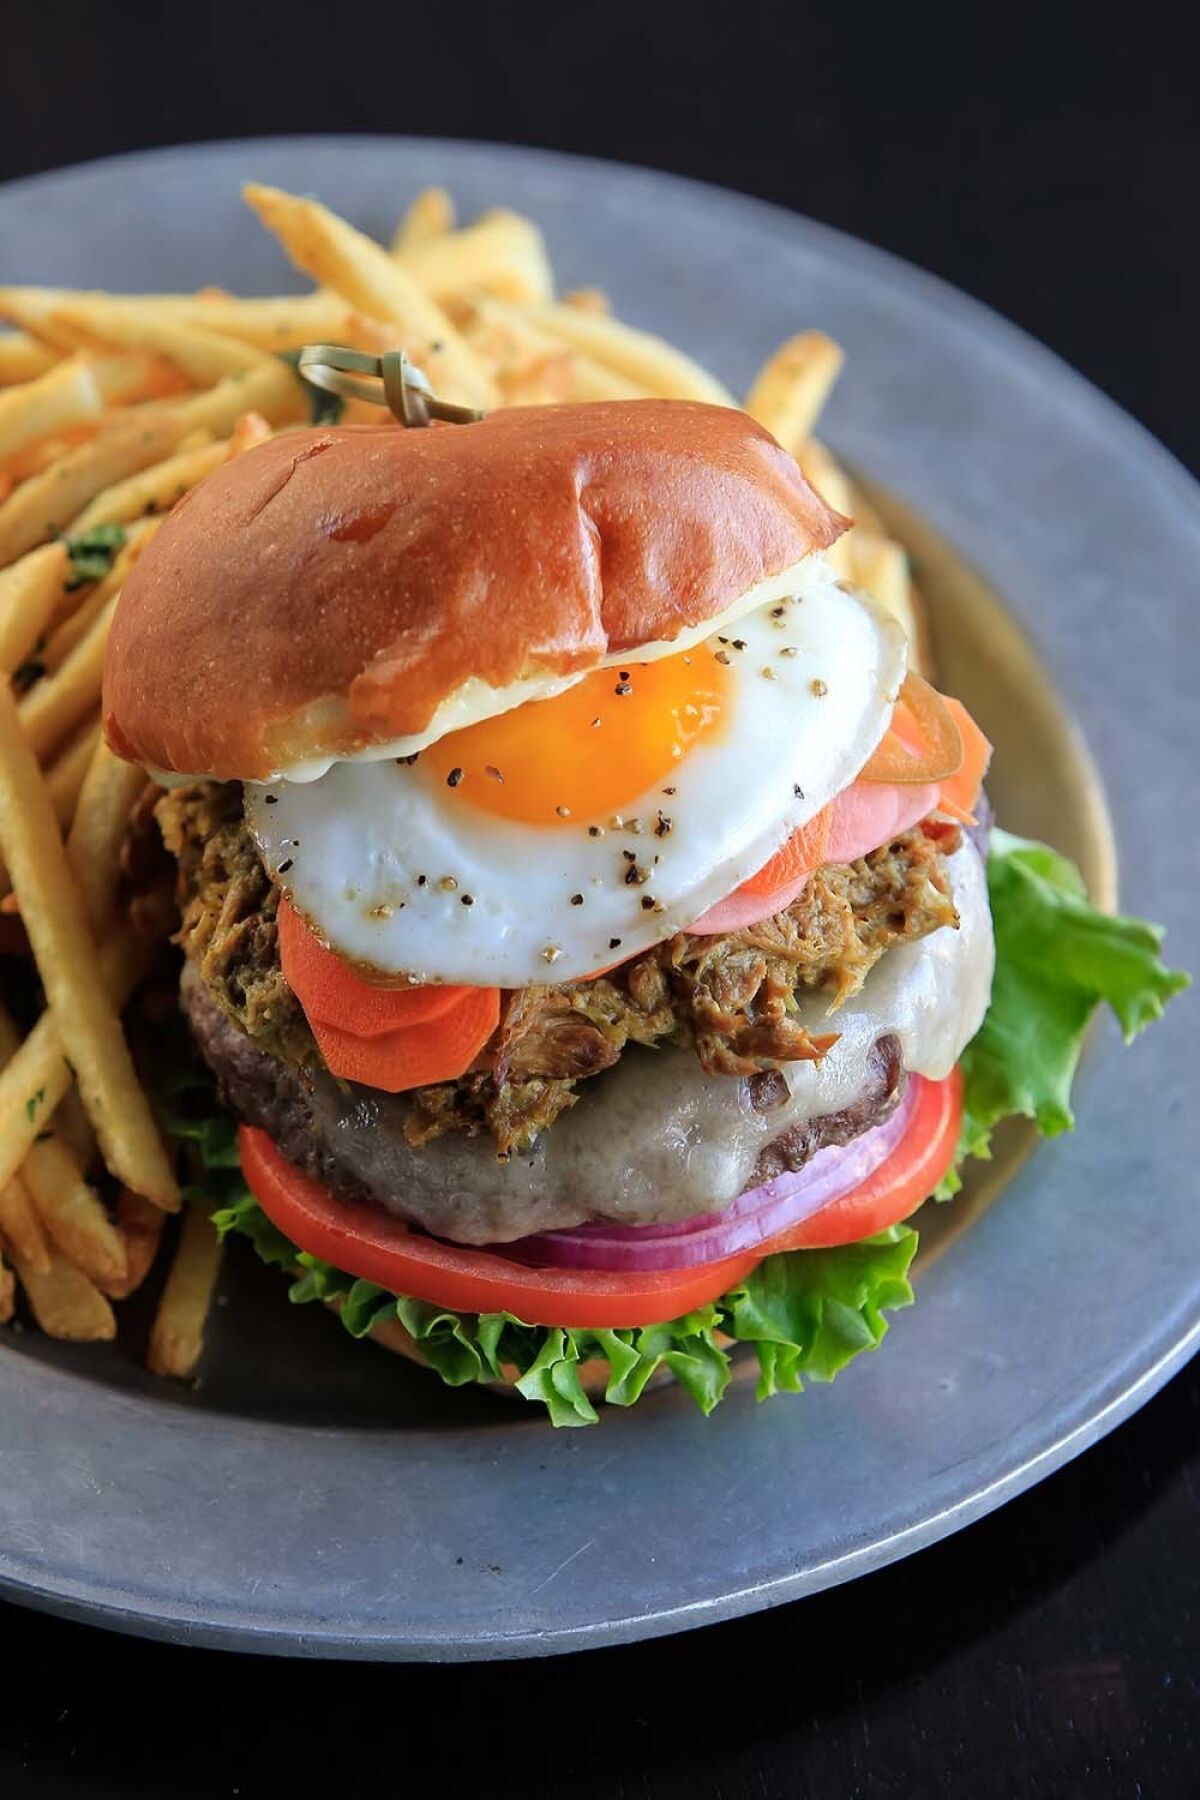 The Waypoint Burger (with aged white cheddar, smoked tomatillo pulled pork, roasted garlic aioli, spicy house pickled veggies, sunny egg).